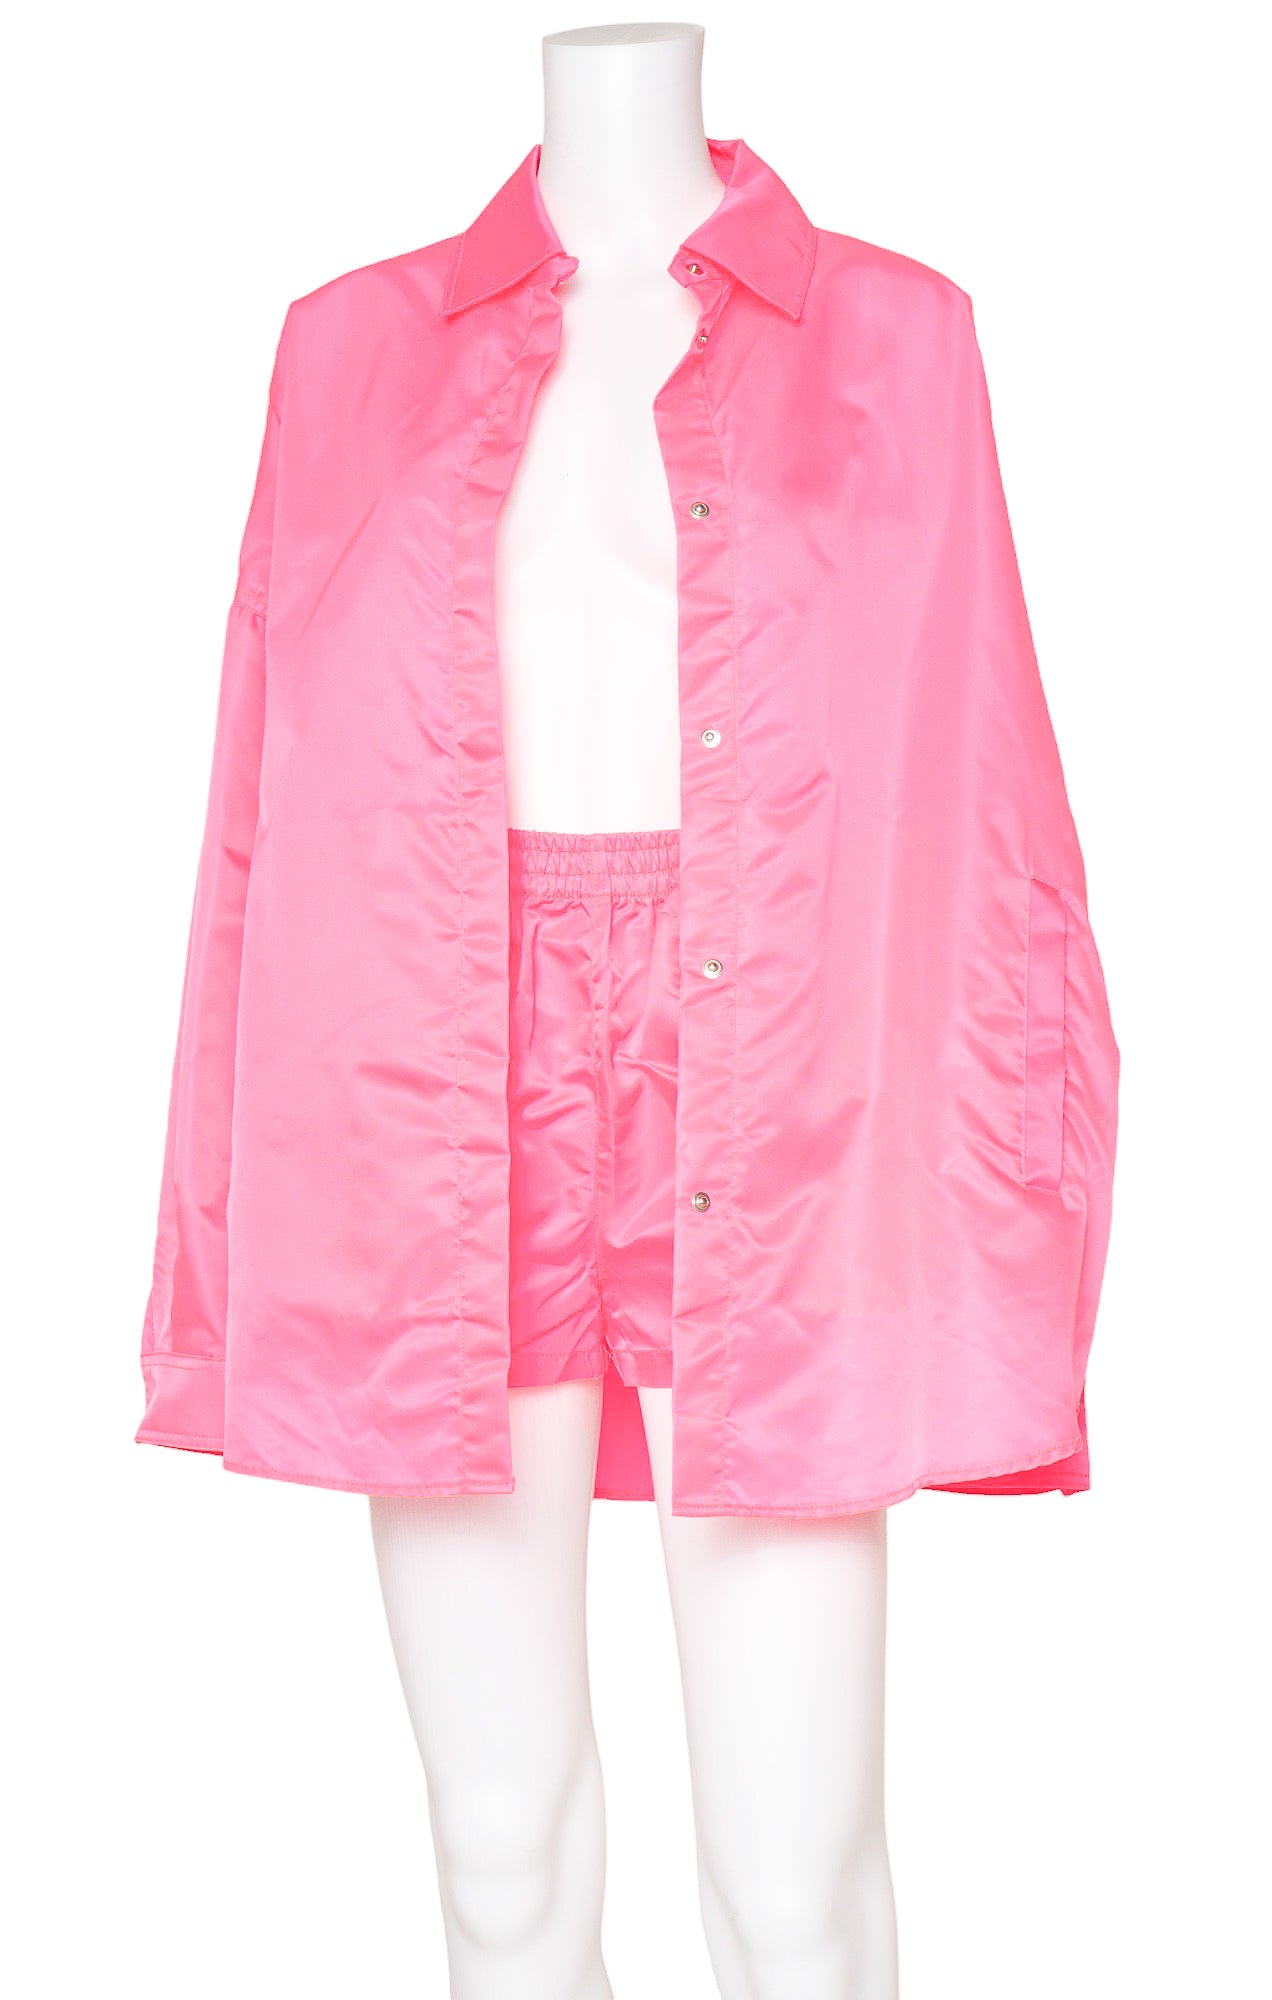 THE FRANKIE SHOP (NEW) with tags Set Size: Jacket - Marked XS/S but fits like OSFM Shorts - S